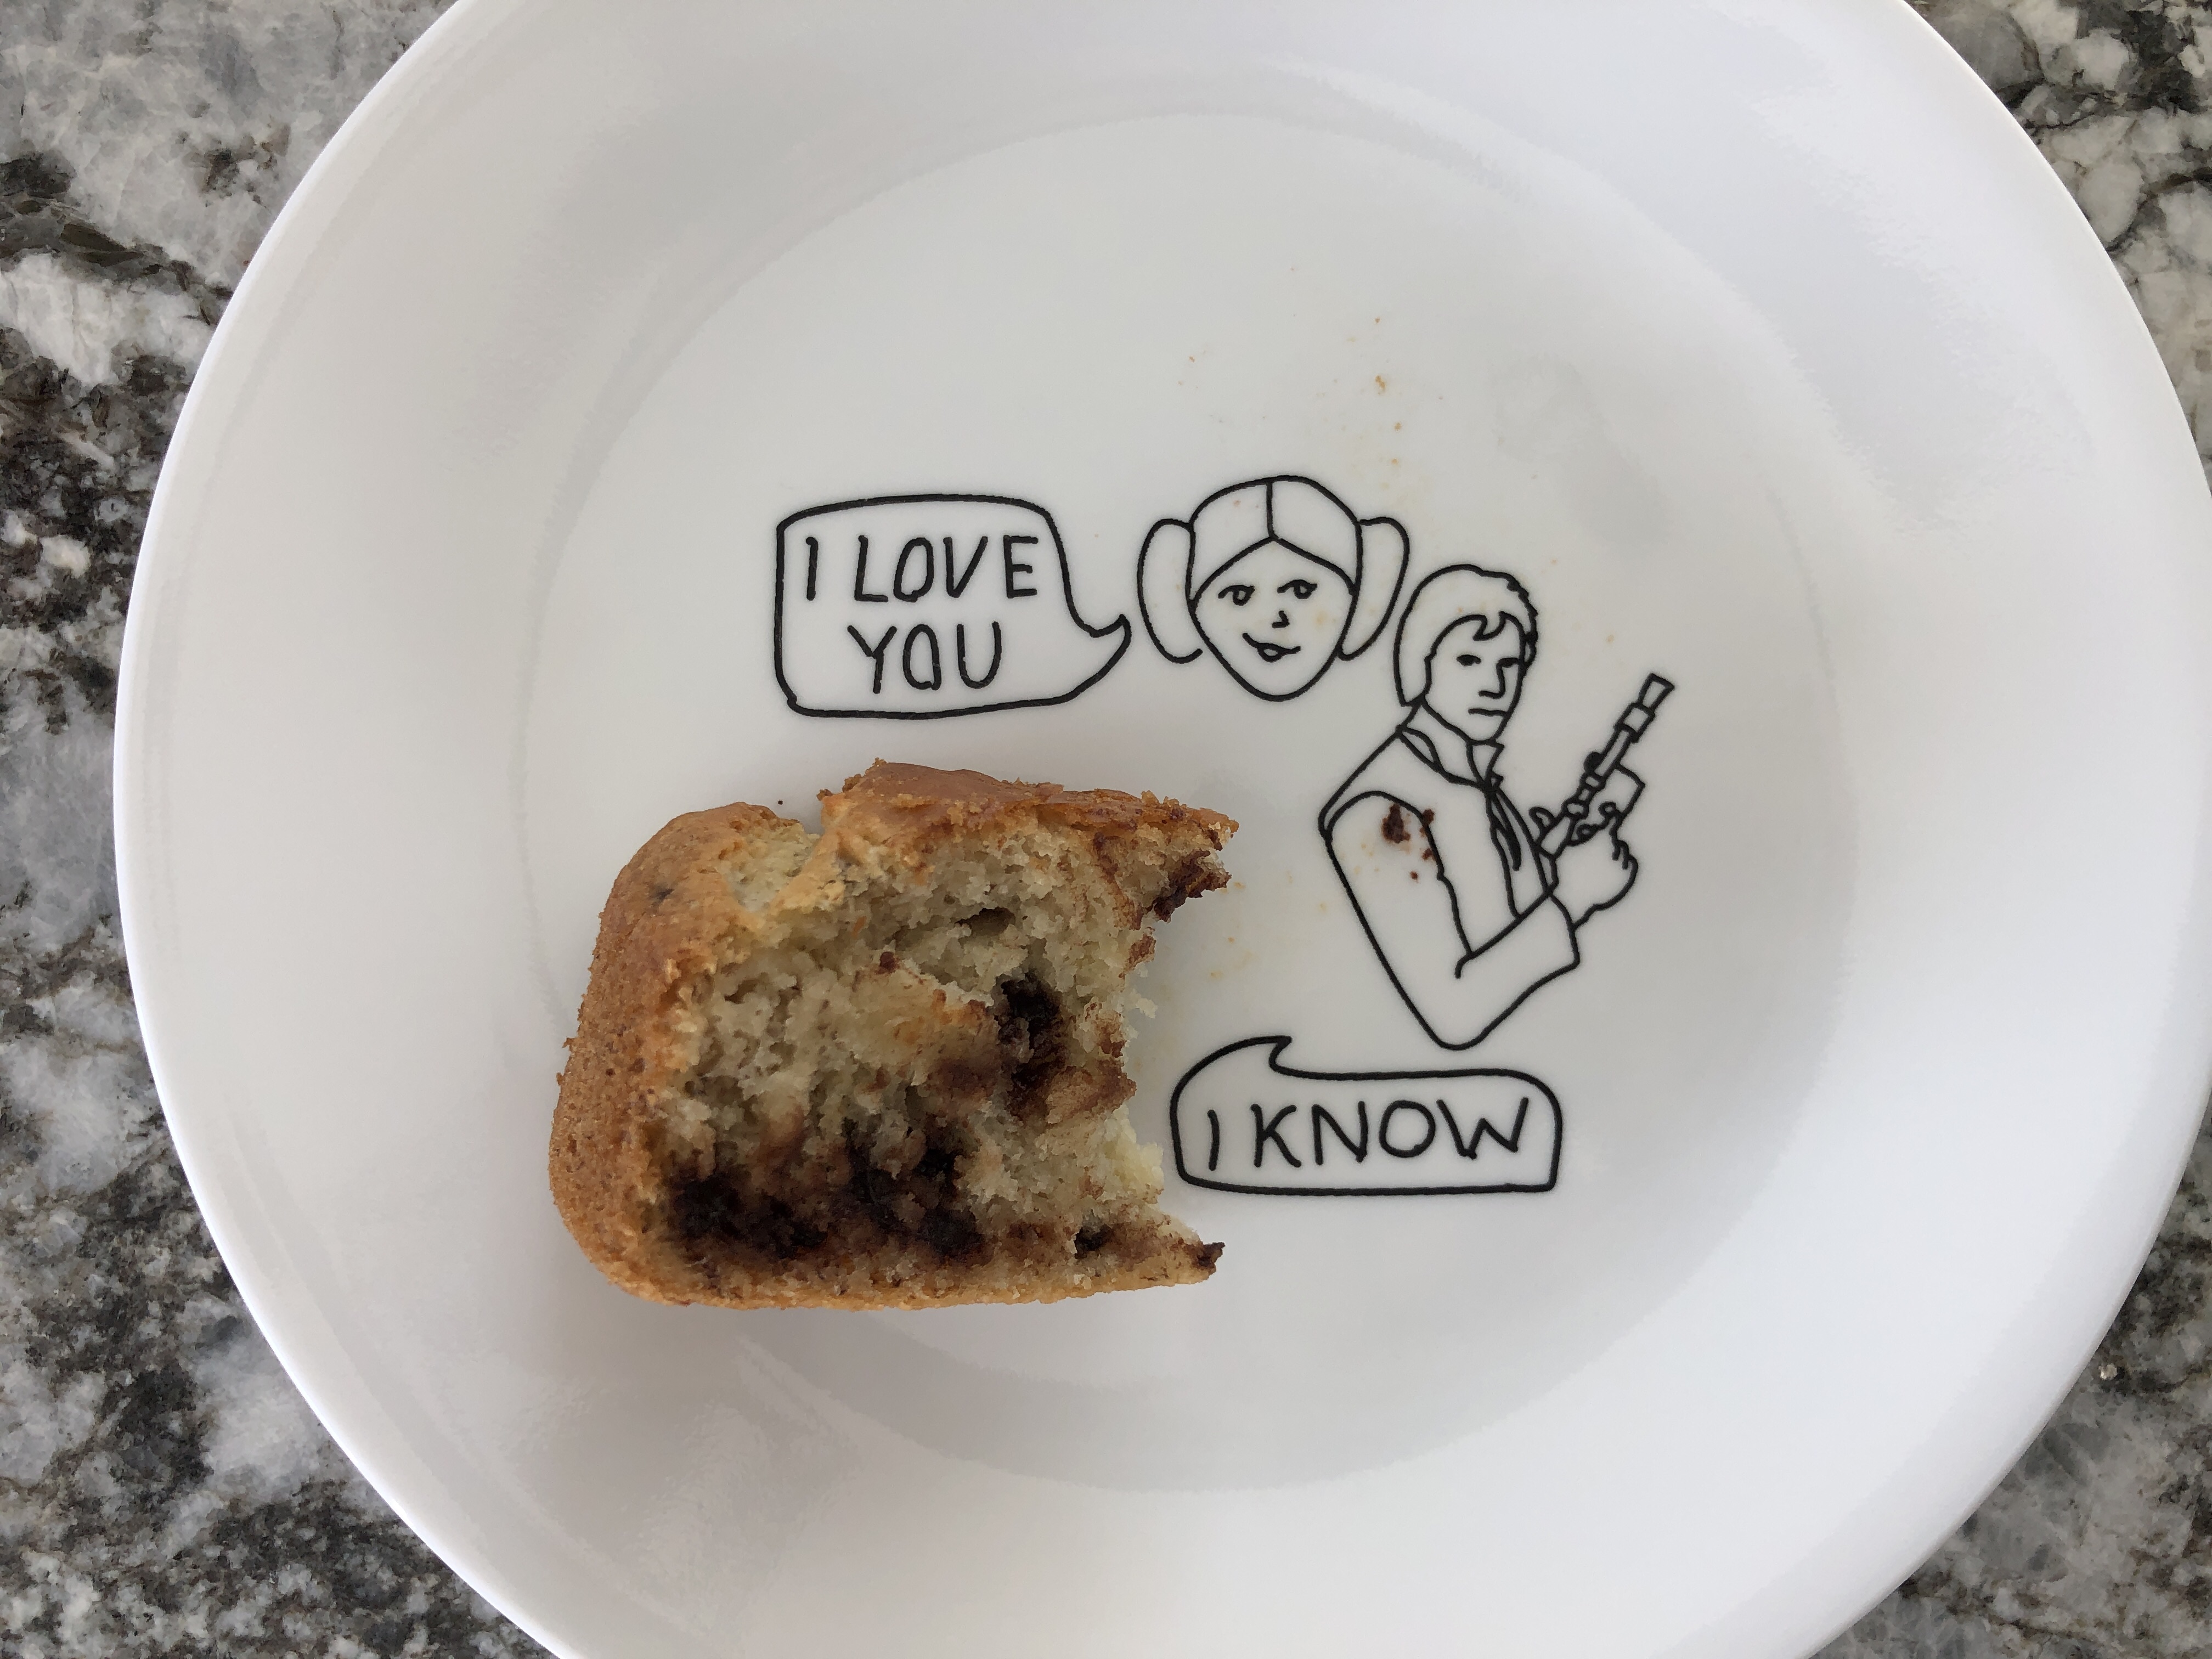 A half eaten slice of banana bread sits on a plate on which is drawn a cartoon figure of Leia saying ‘I love you’ to Han saying ‘I know’.